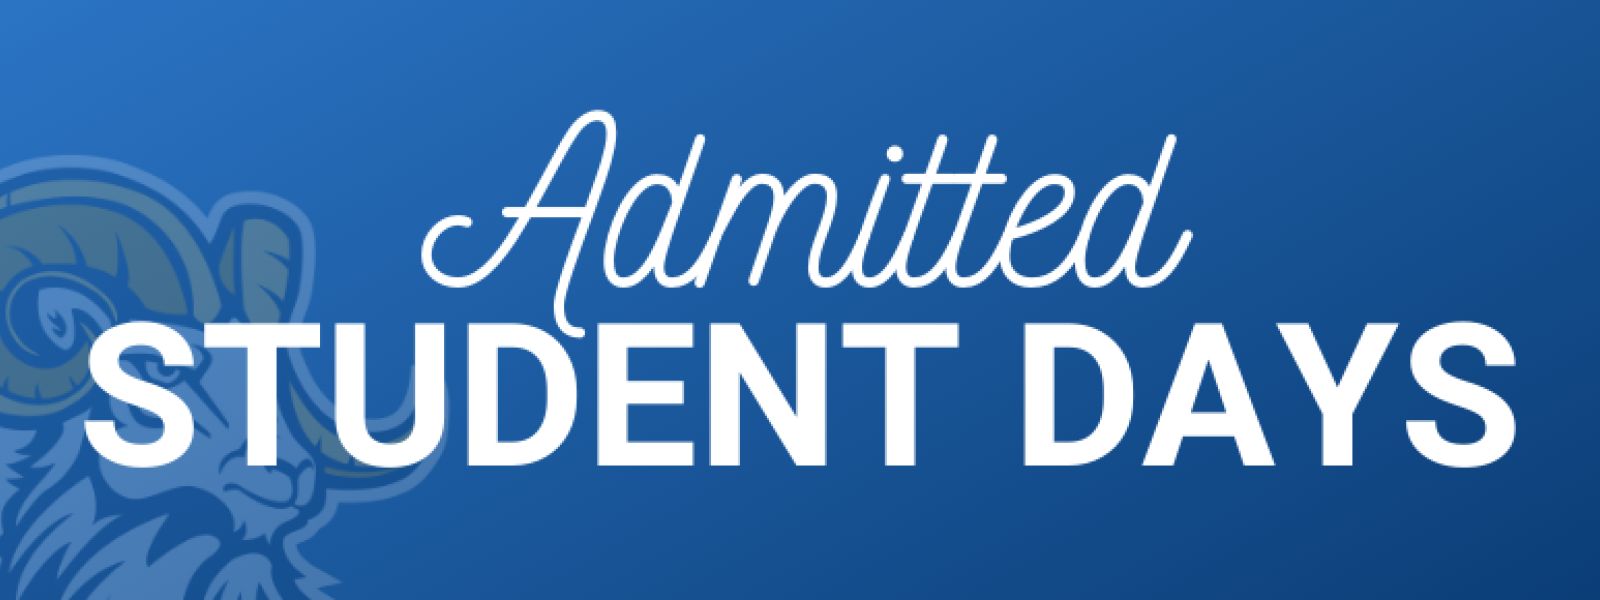 Admitted Student Days at Columbia International University